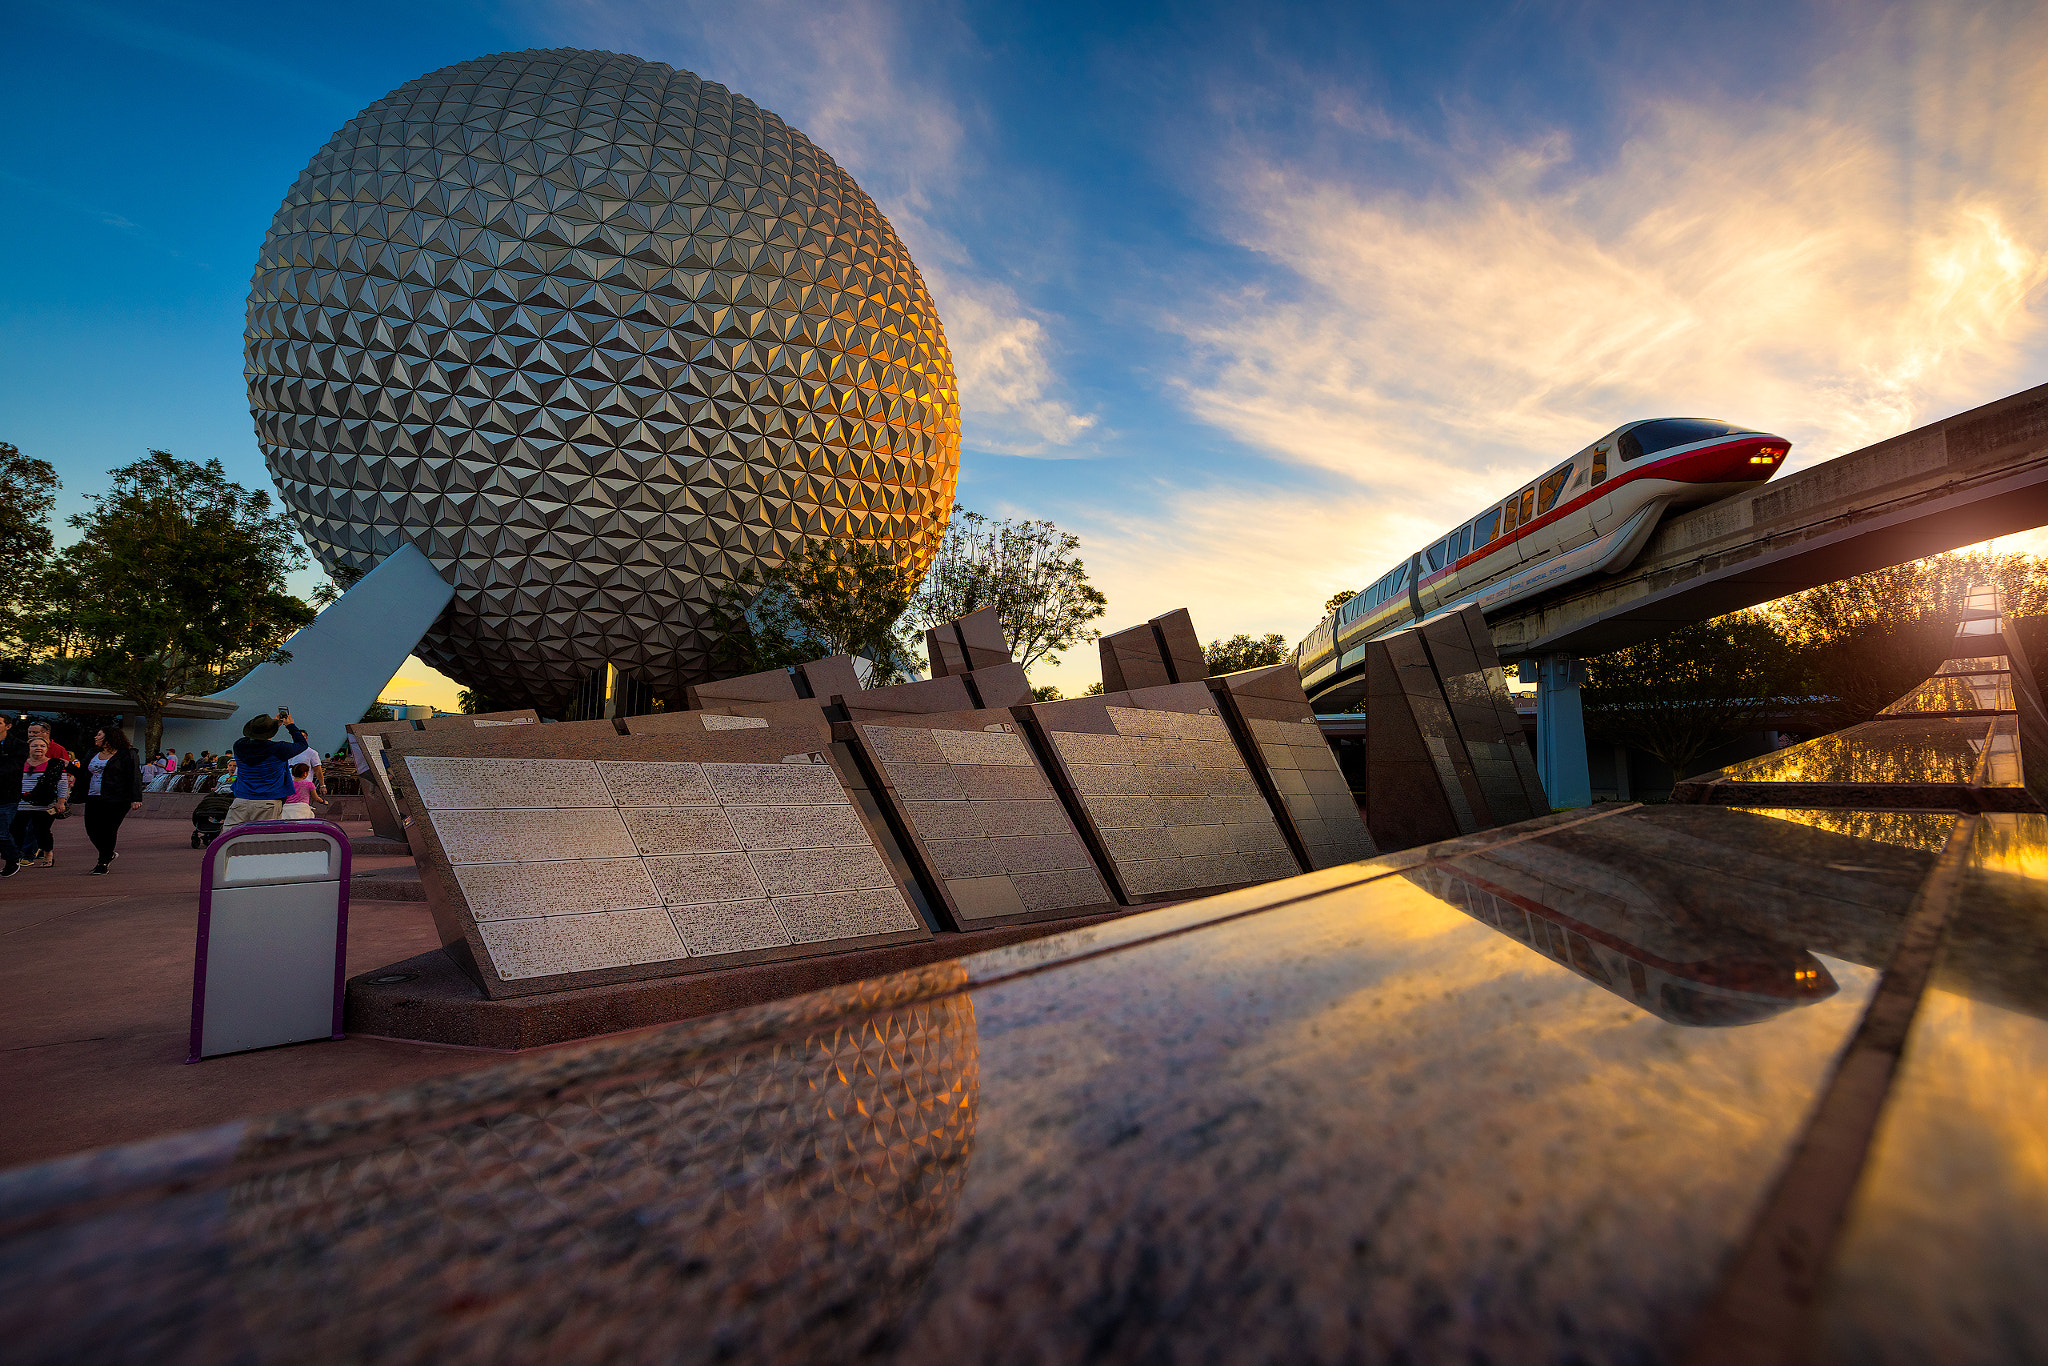 Reflections of Monorail and Spaceship Earth